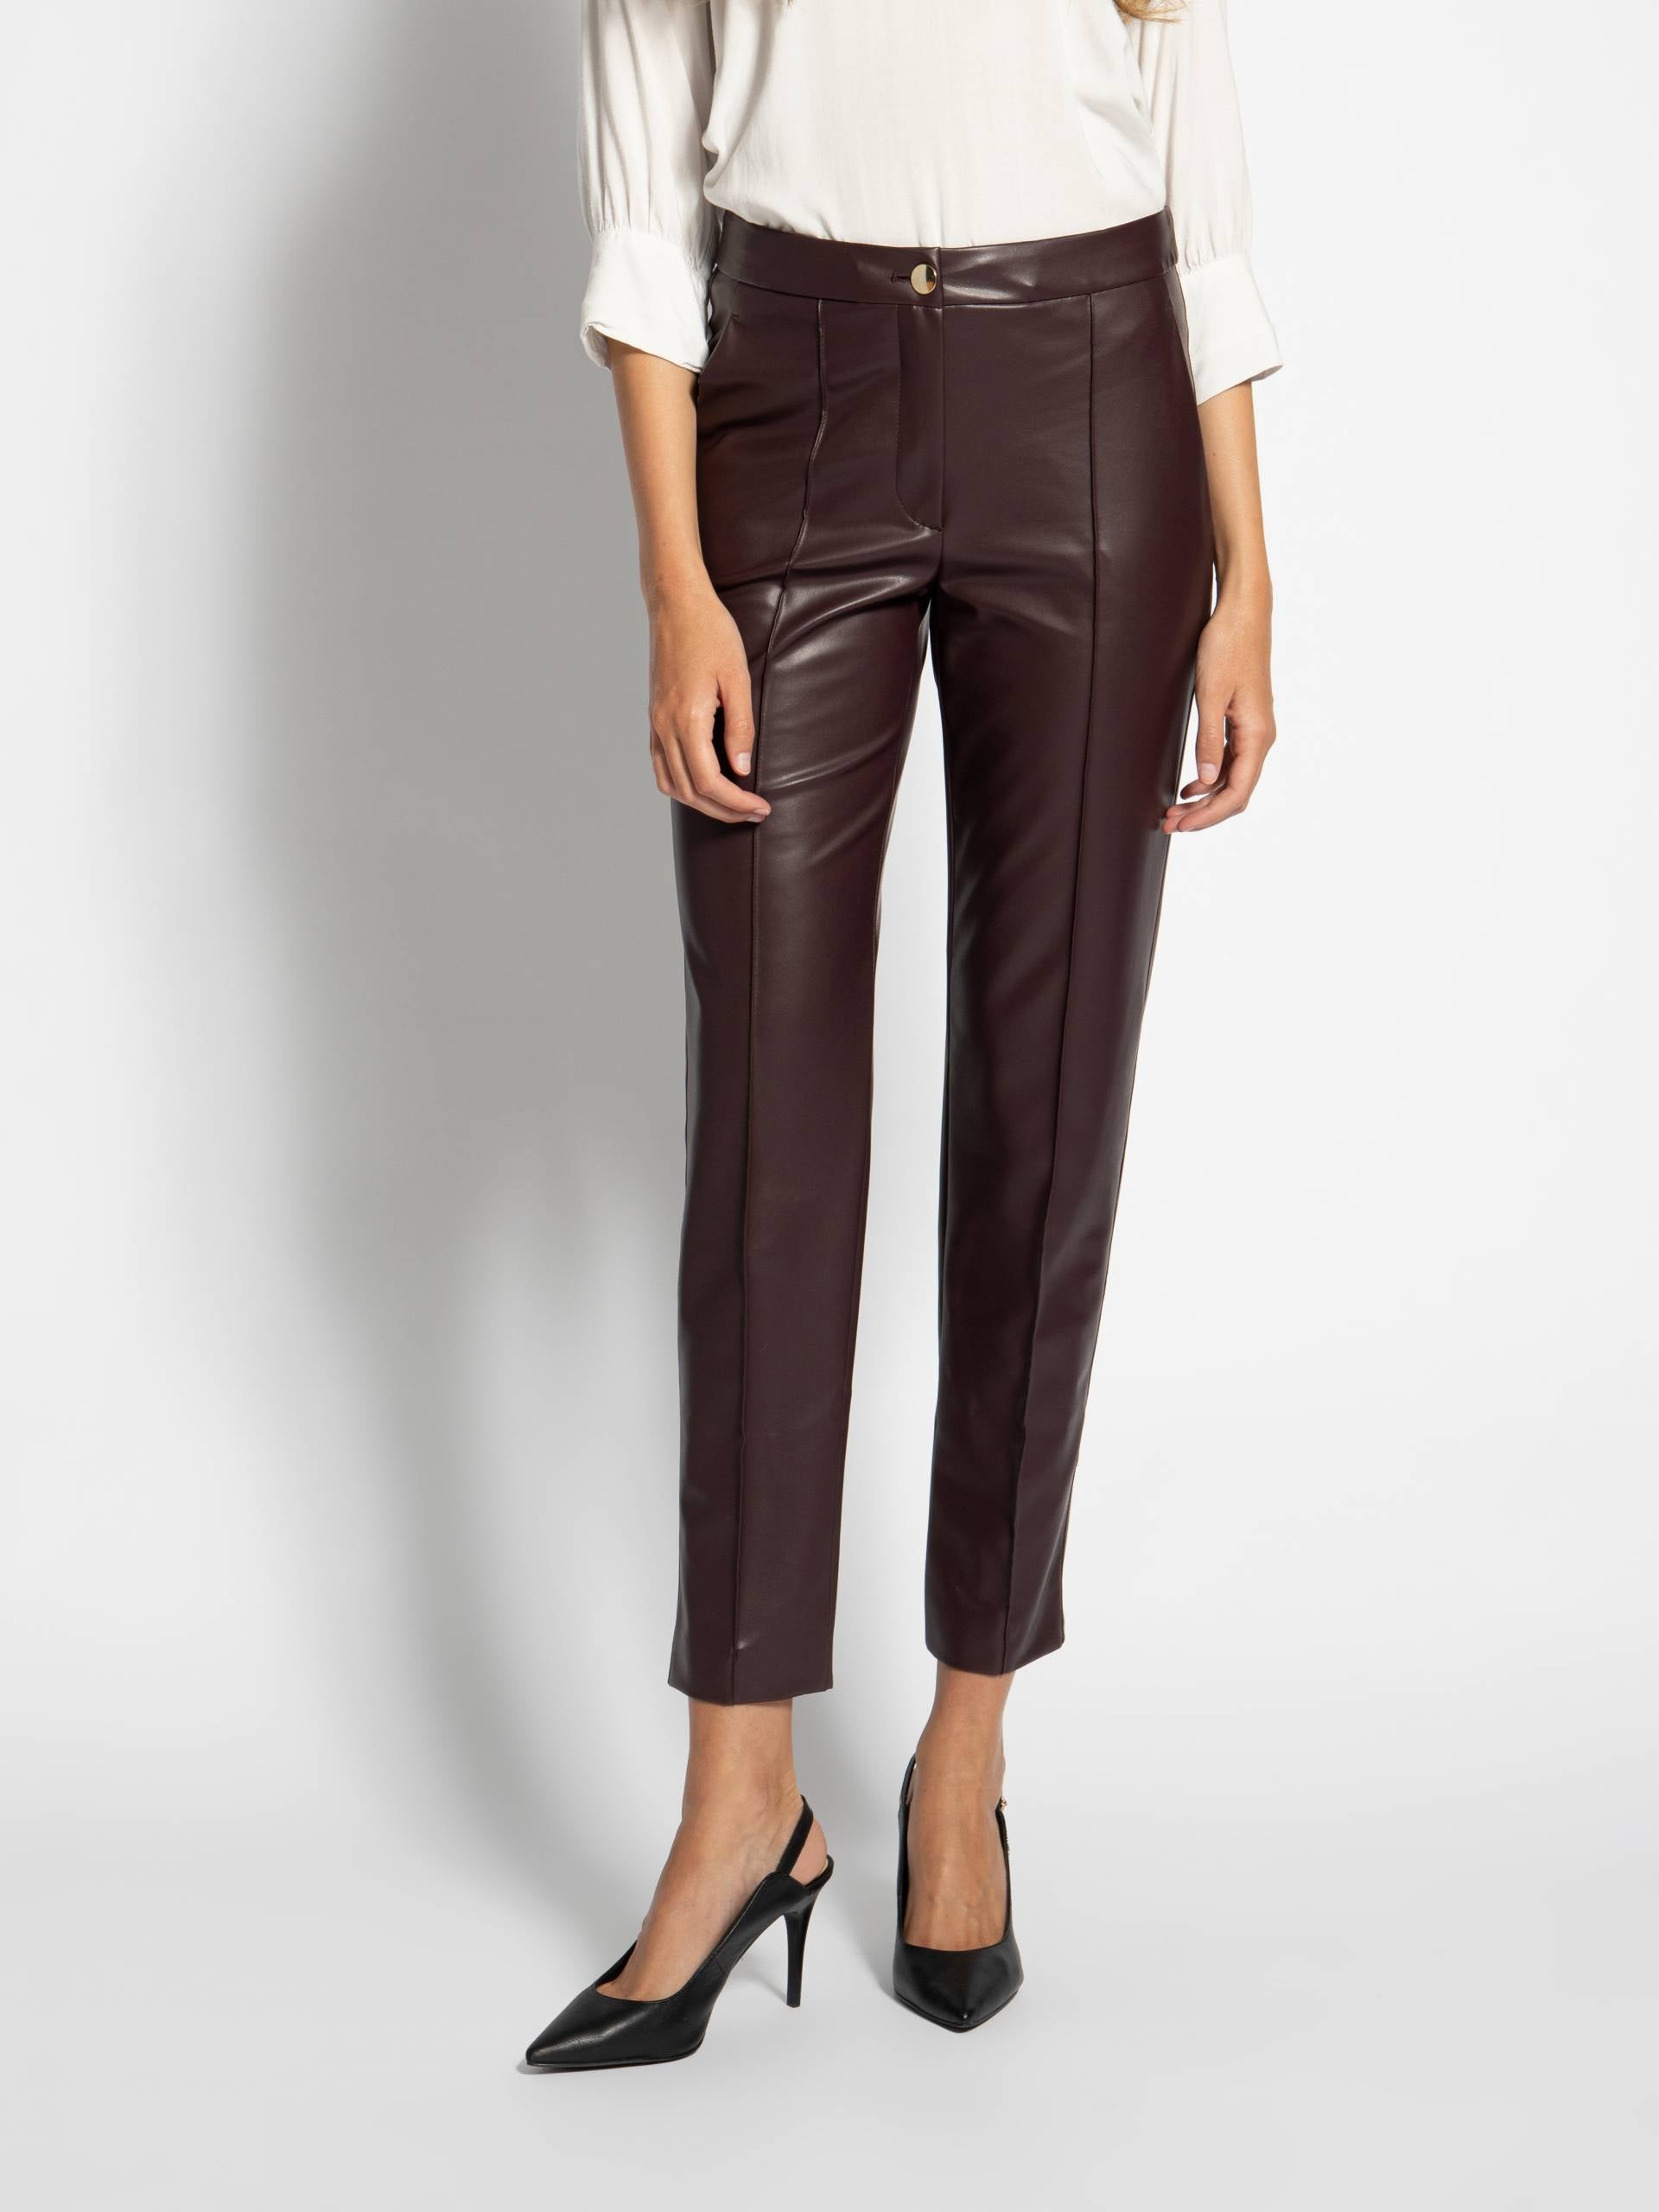 Marc Cain Vegan Leather Pant – The One & Only Shoes, Clothing and